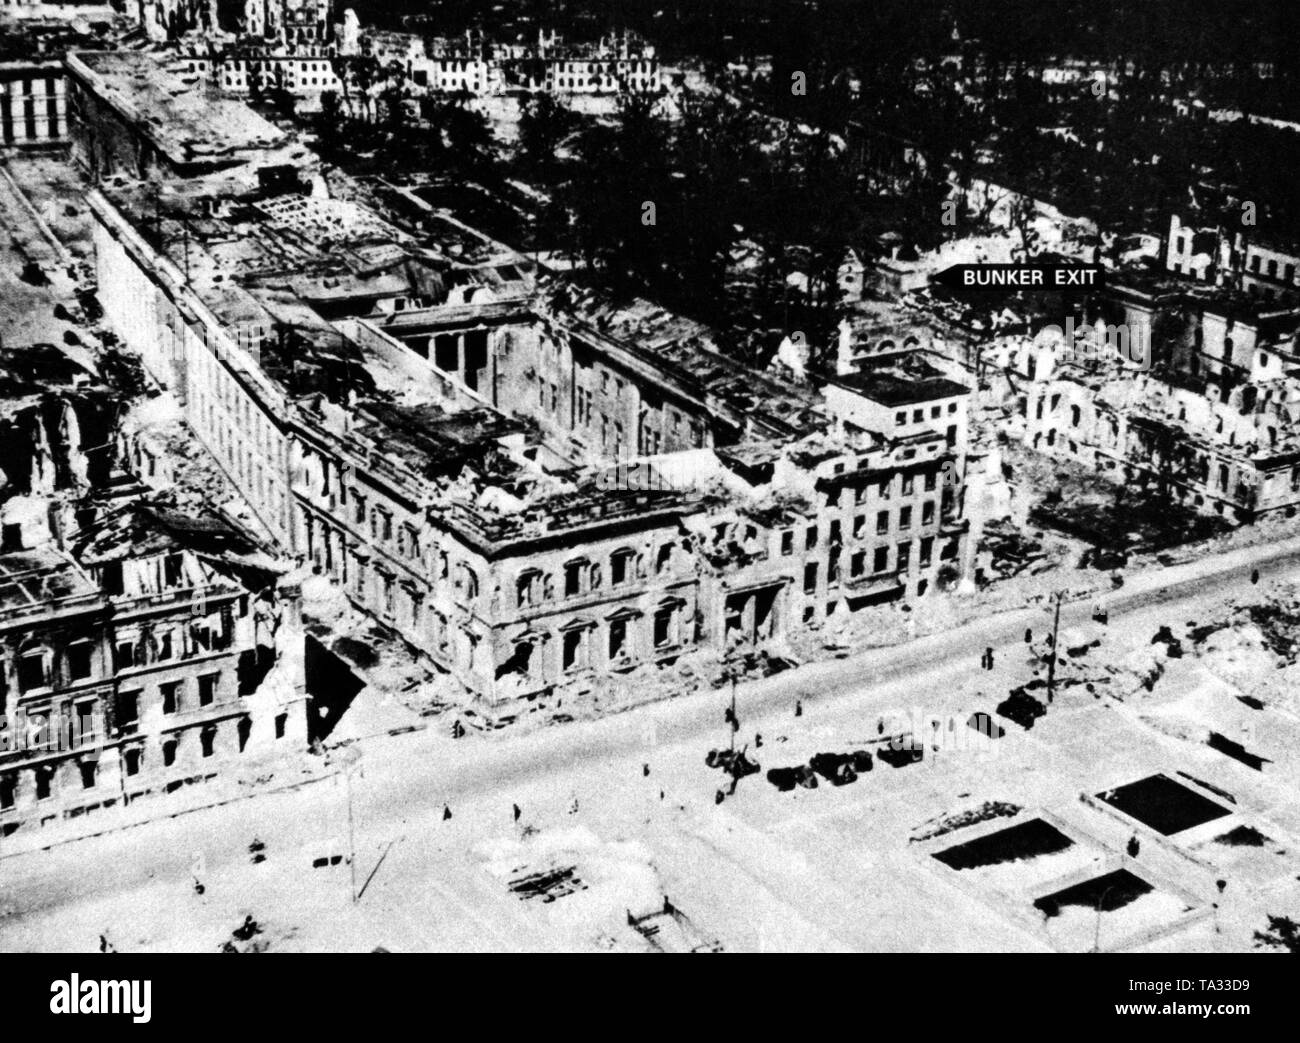 Photo of the entire site of the destroyed Reich Chancellery in Berlin, taken in the summer of 1945. The exit to the 'Fuehrerbunker' is marked at the top on the right. Stock Photo